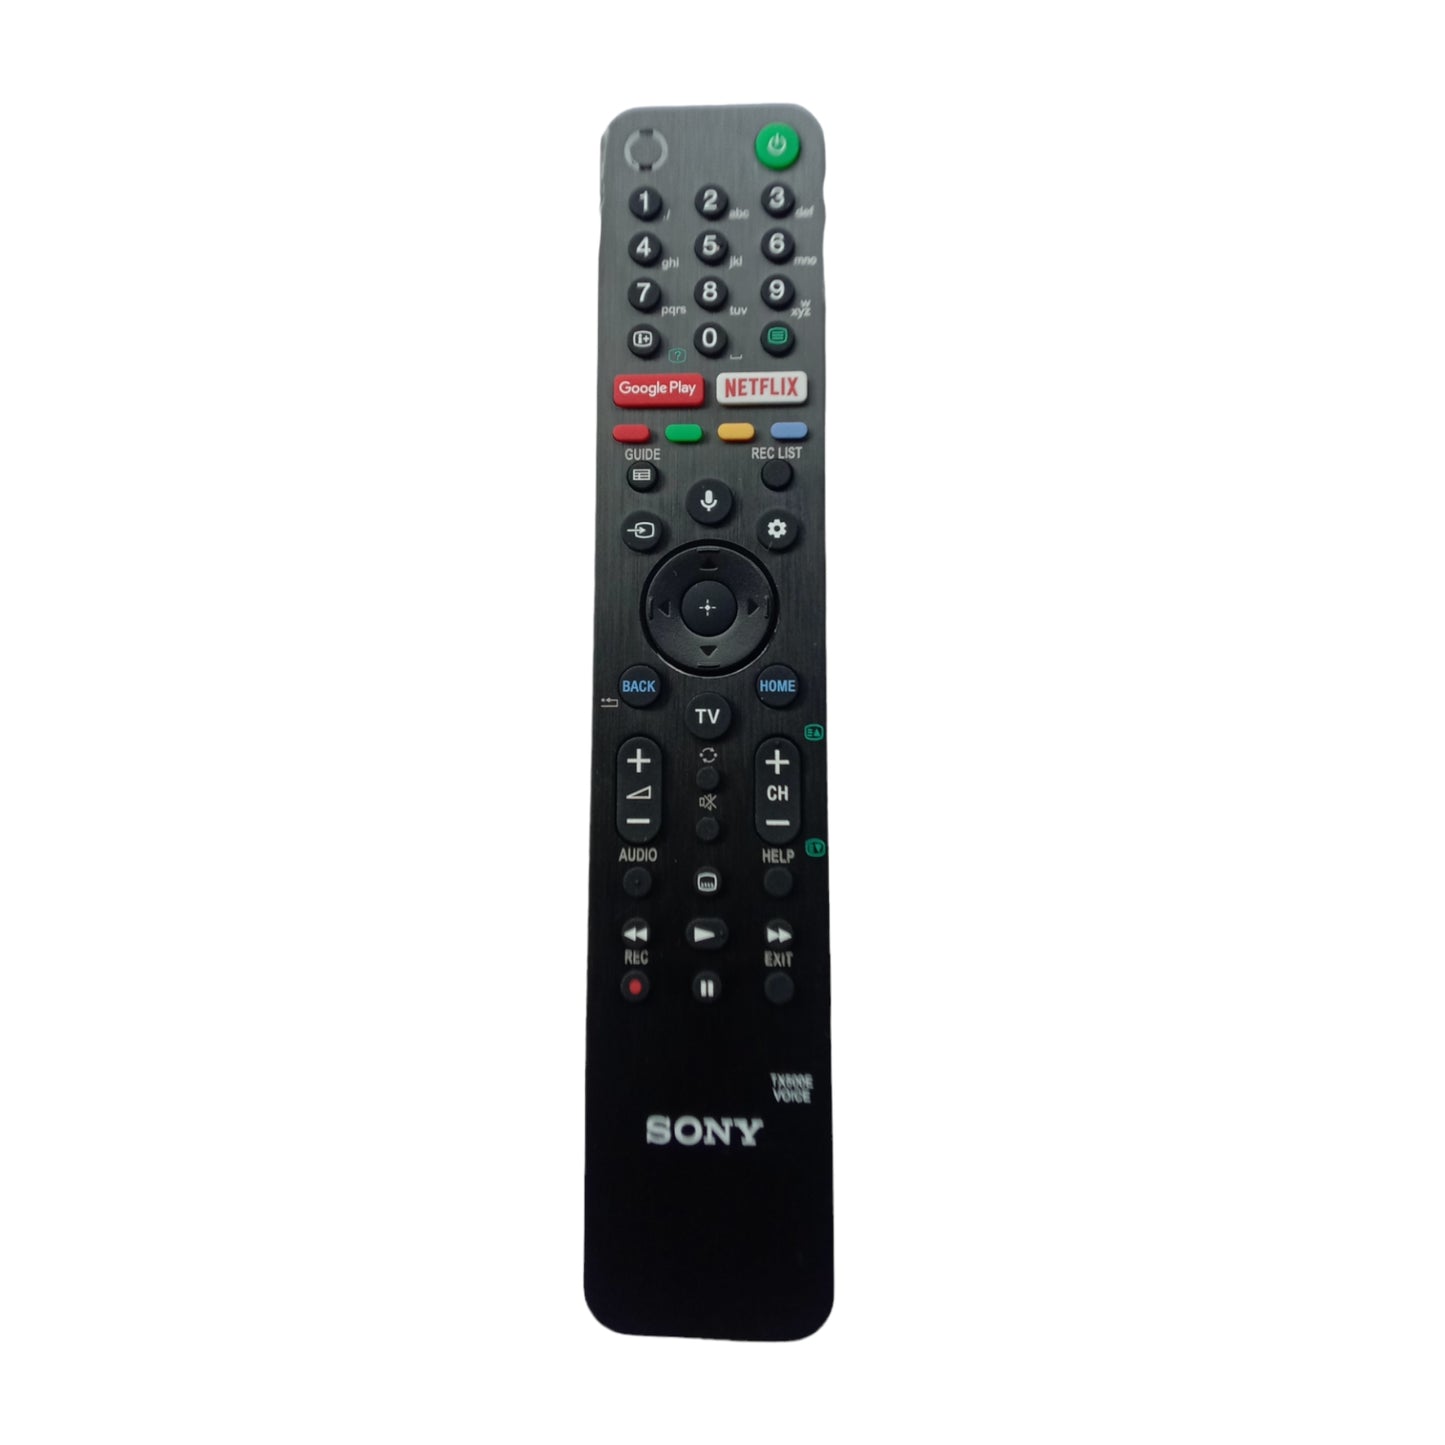 Orginal Sony Smart TV remote control with Googleplay  and Netflix and google voice